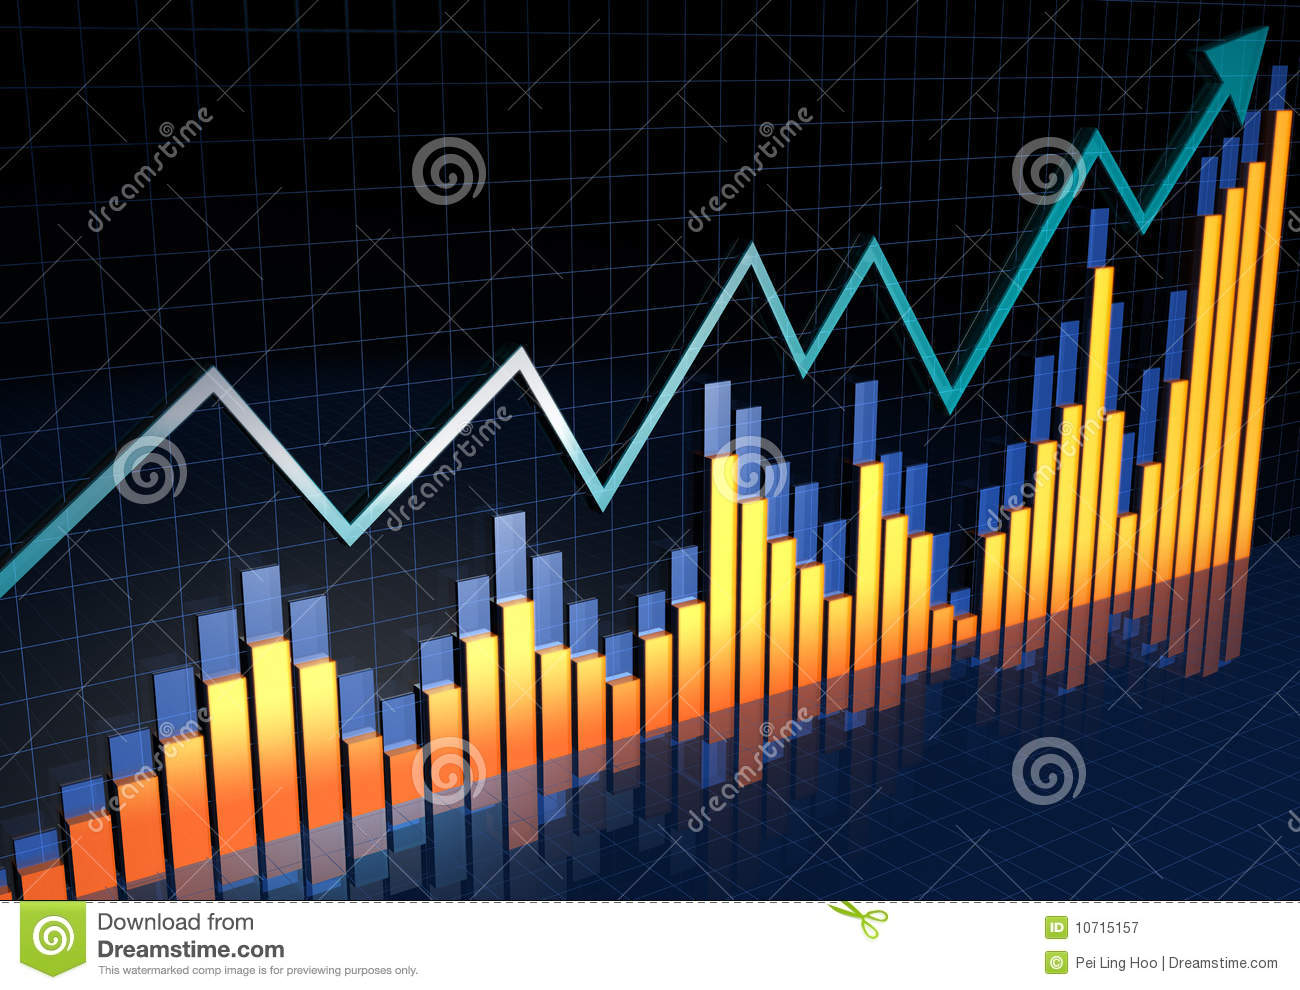 Free Stock Photography  Financial Report Bussiness Growth Concept